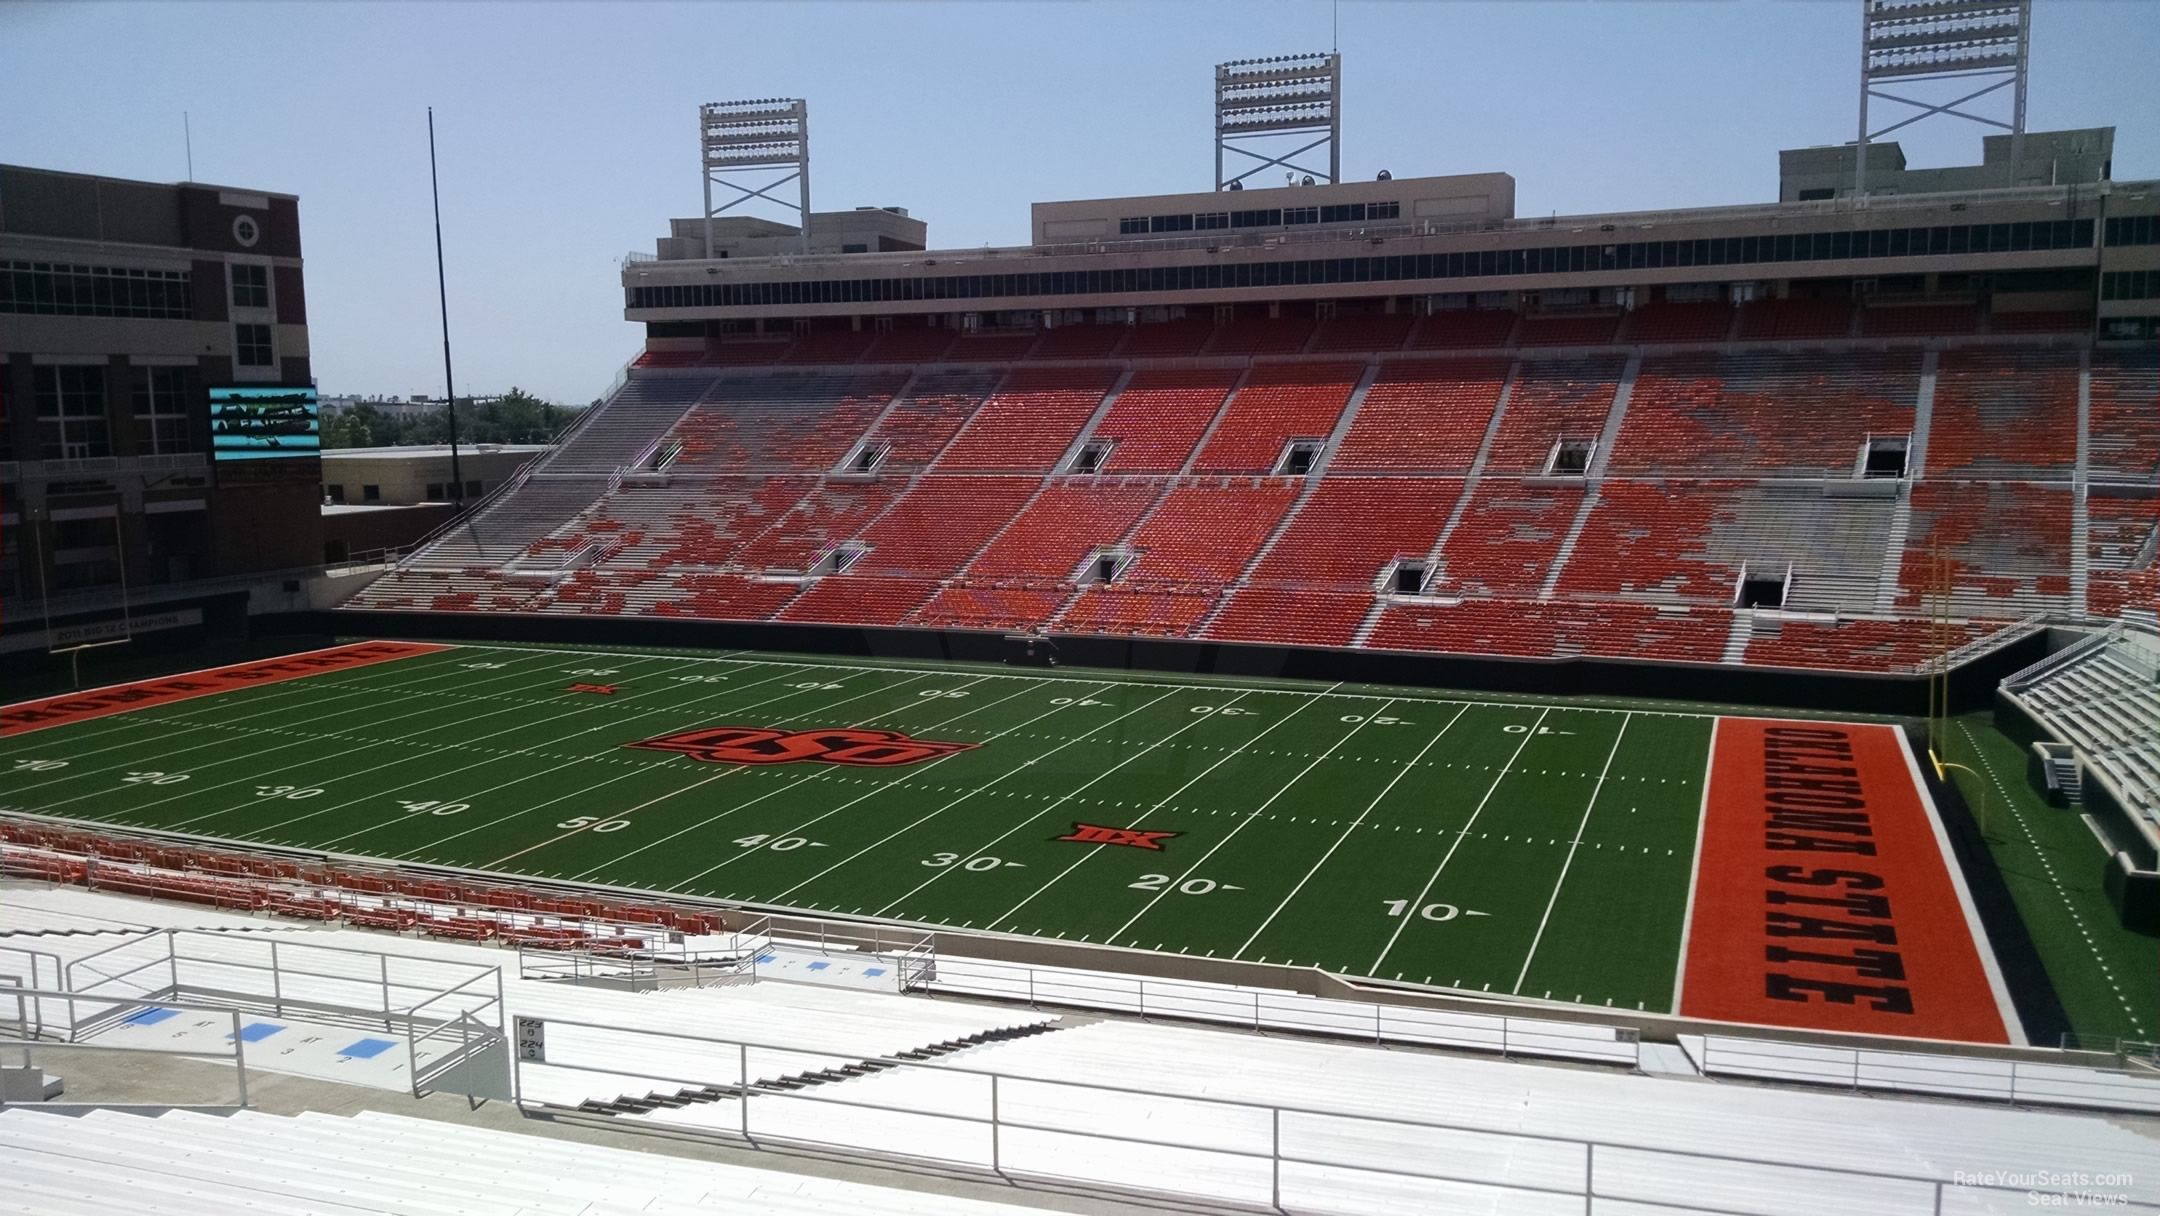 section 329a, row 19 seat view  - boone pickens stadium